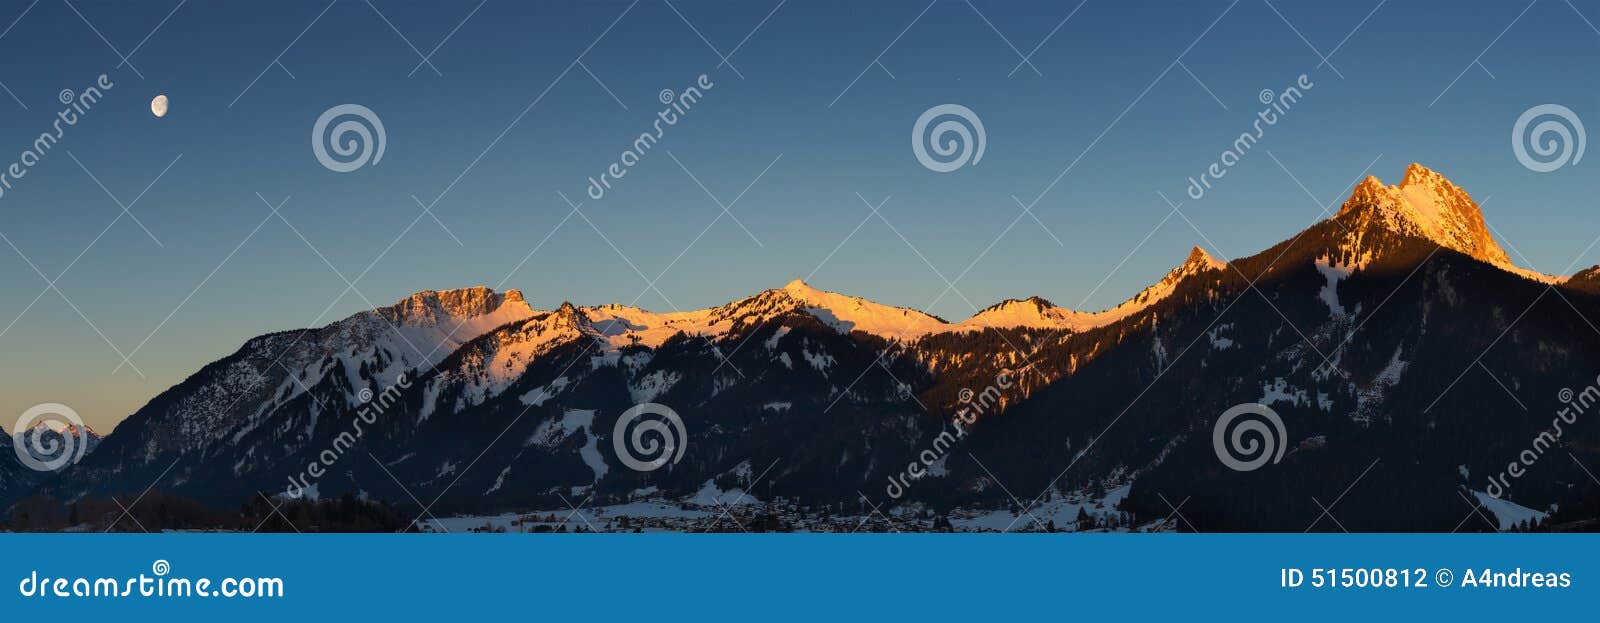 panorama of mountain chain with lighted summits